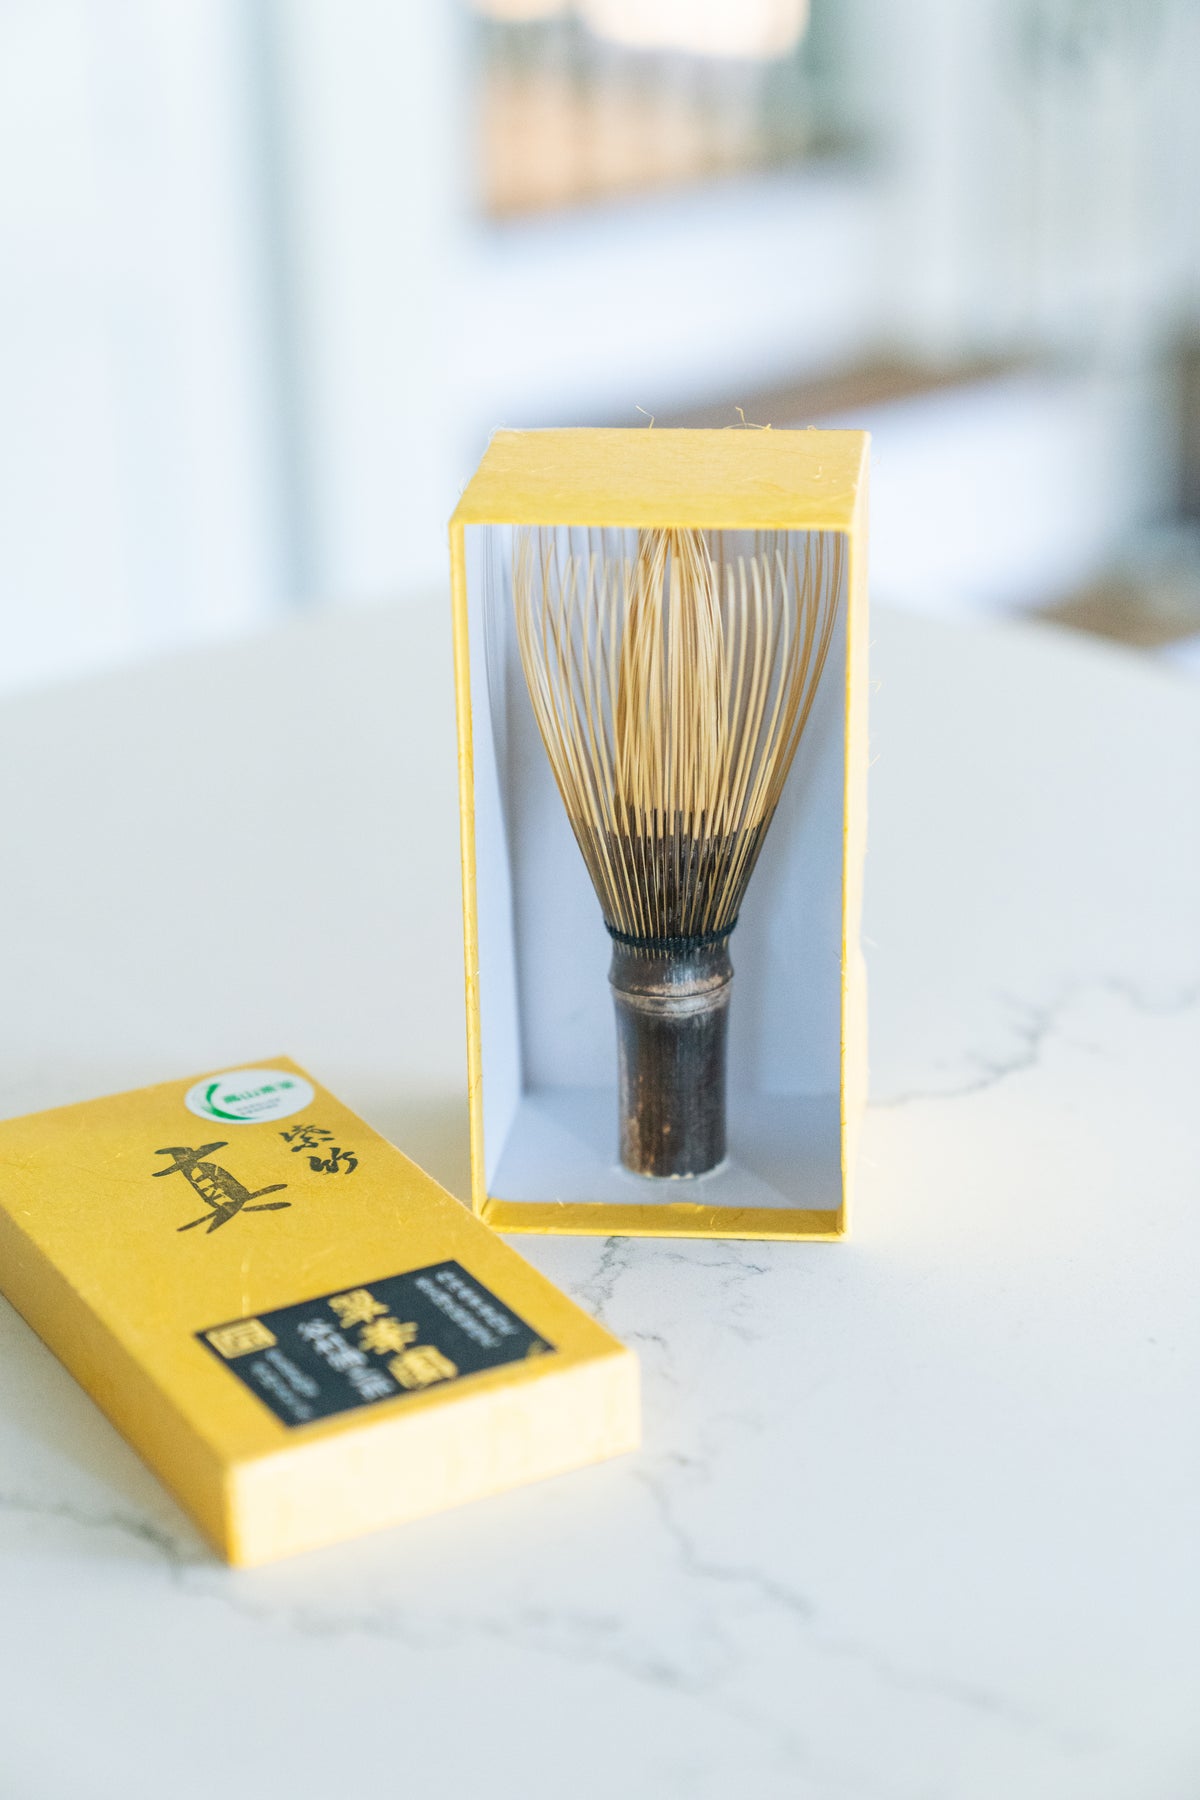 Chasen Matcha Bamboo Whisk 80 Tips - Made in Japan